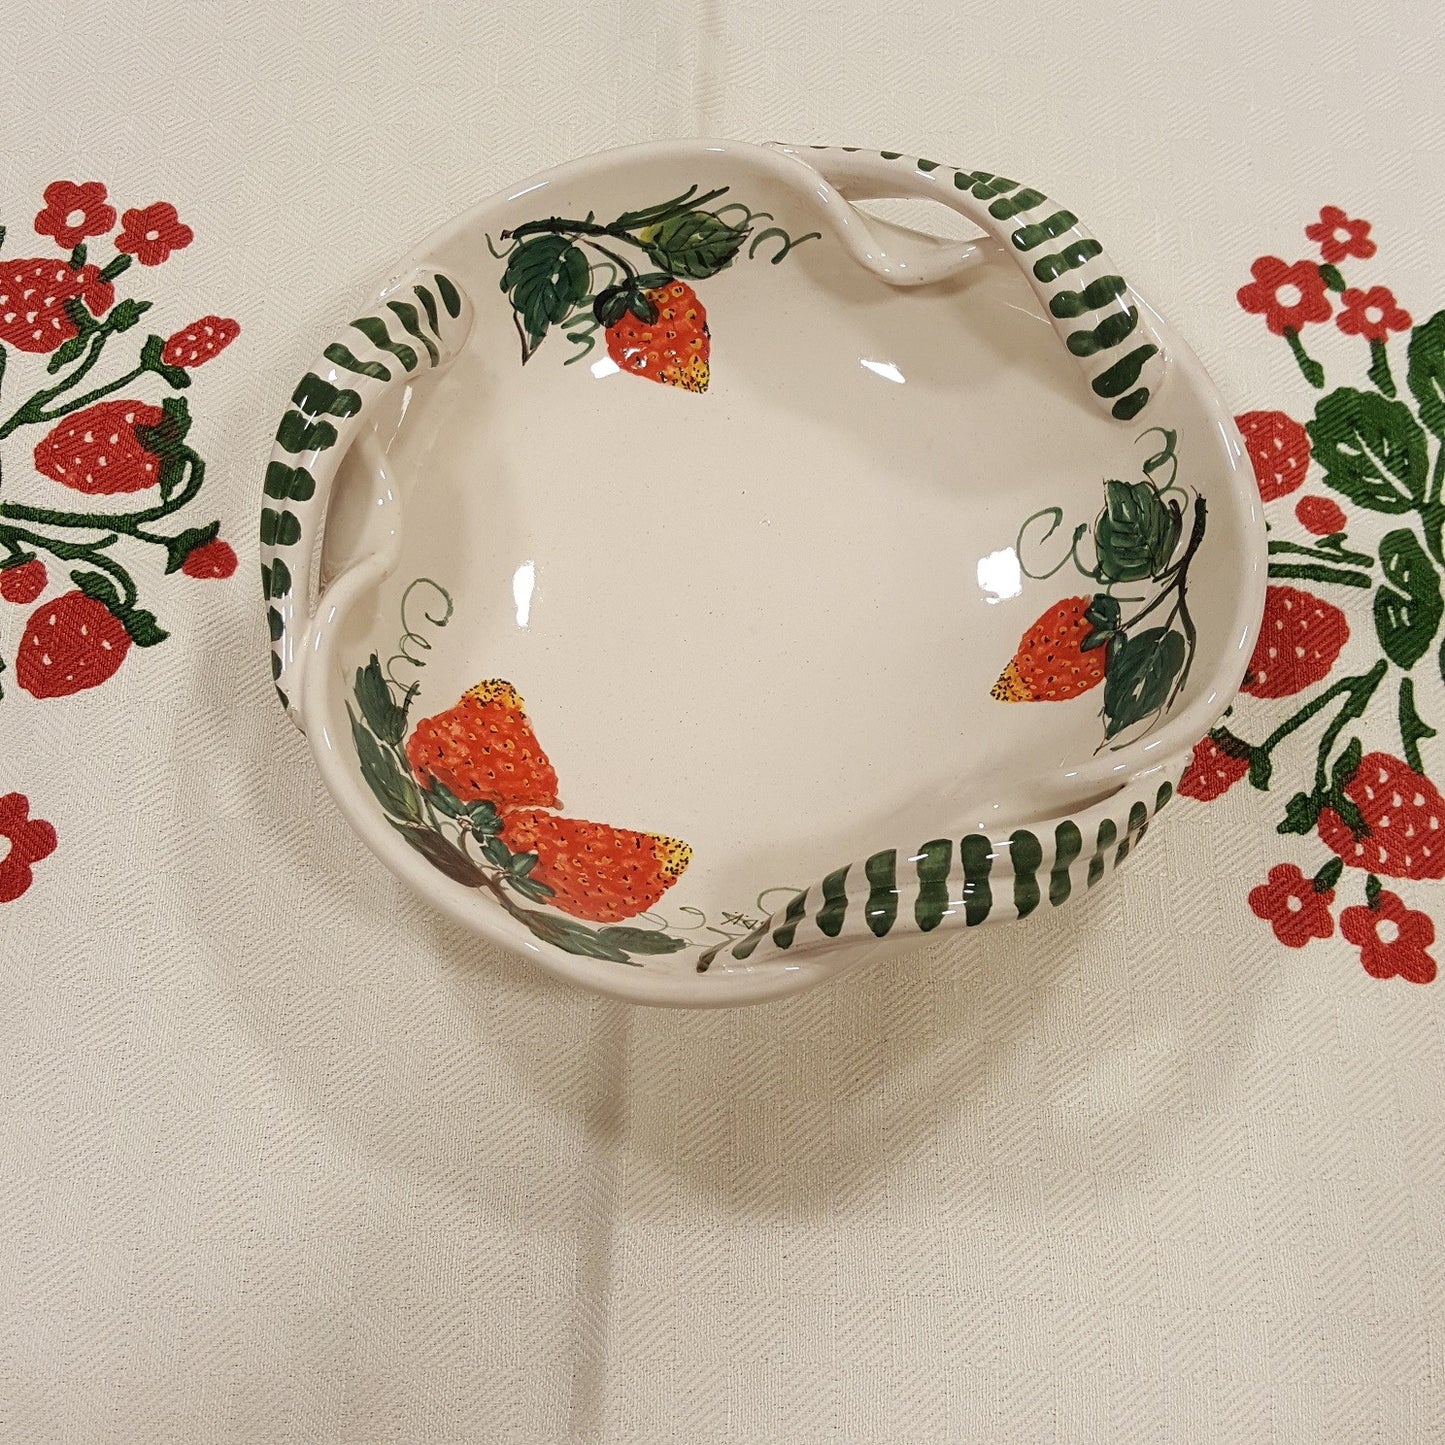 Fruit bowl with pomegranate or strawberry decoration